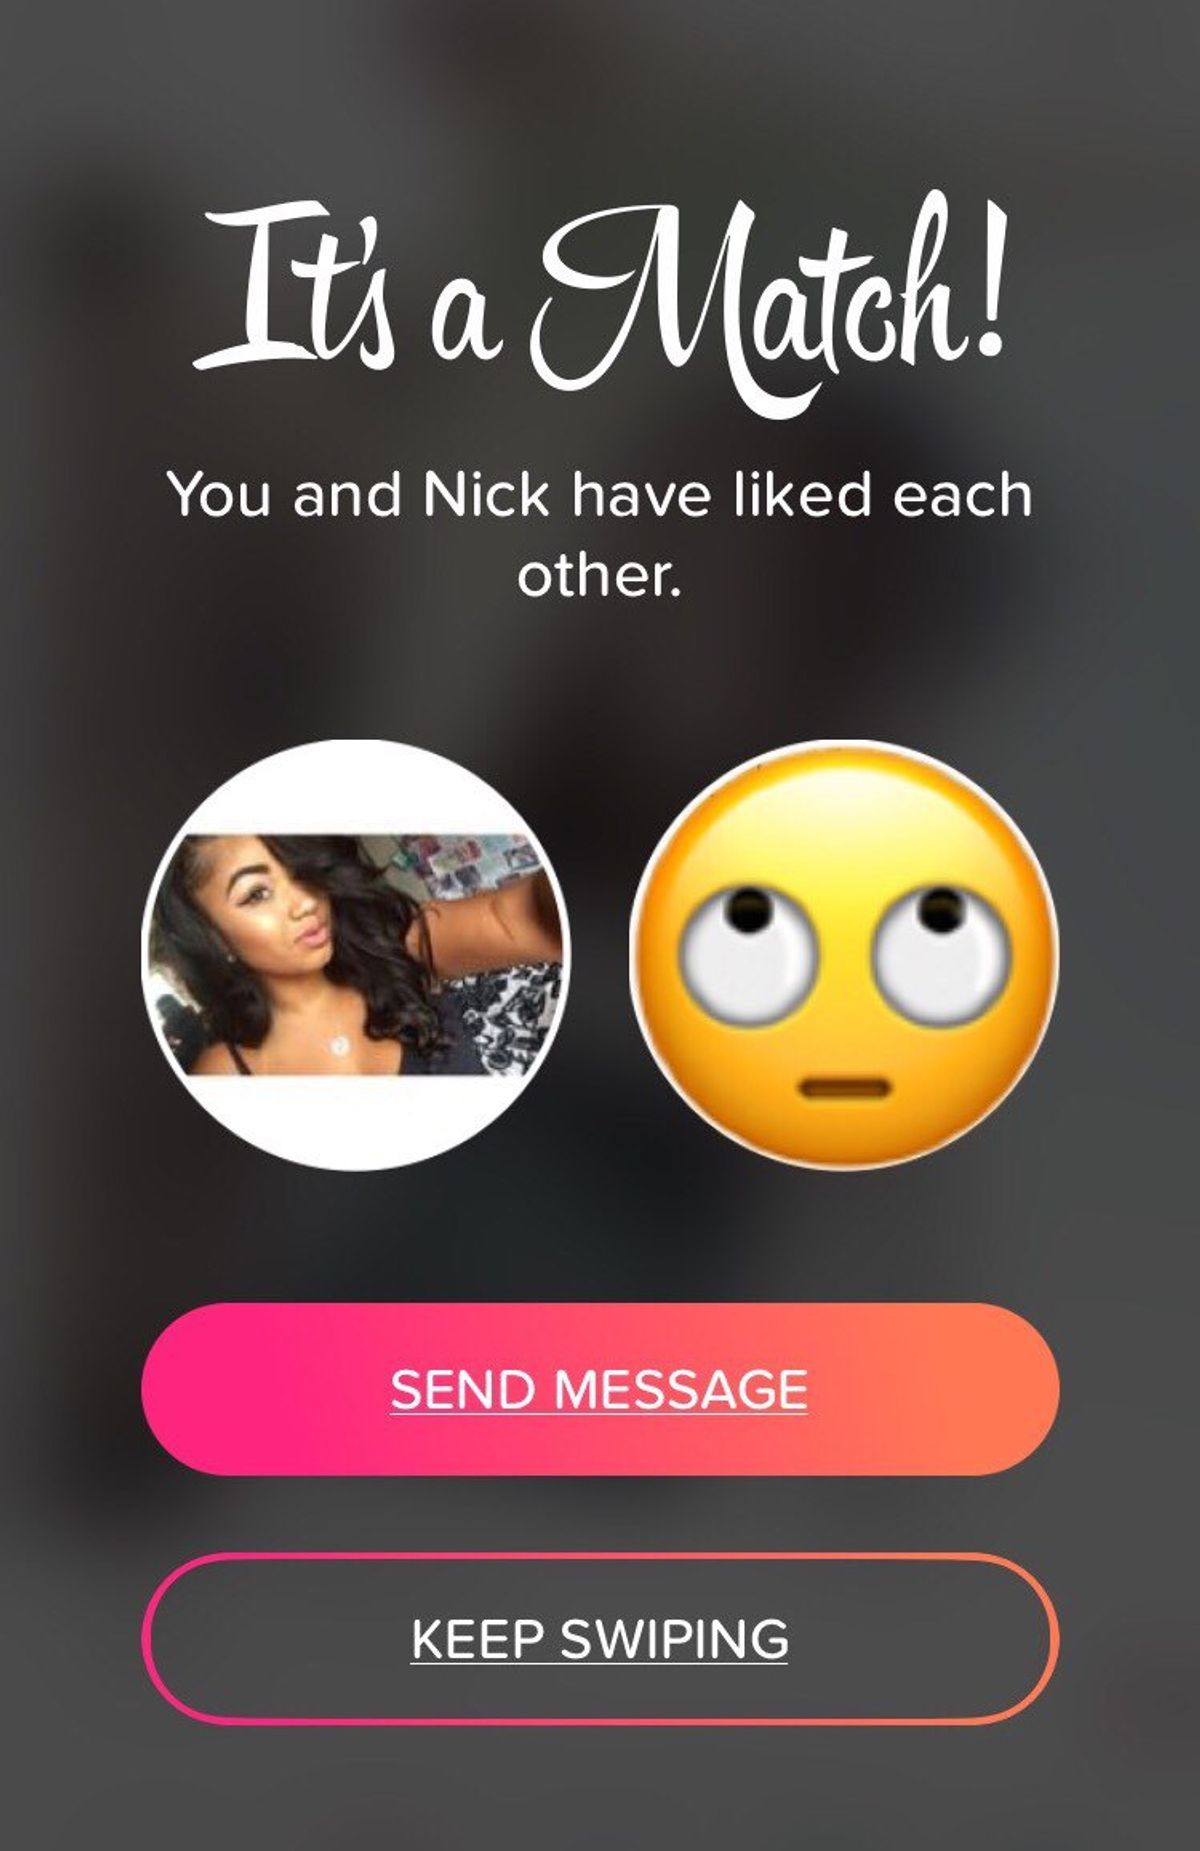 7 Reasons Why Tinder Is A Bad Idea